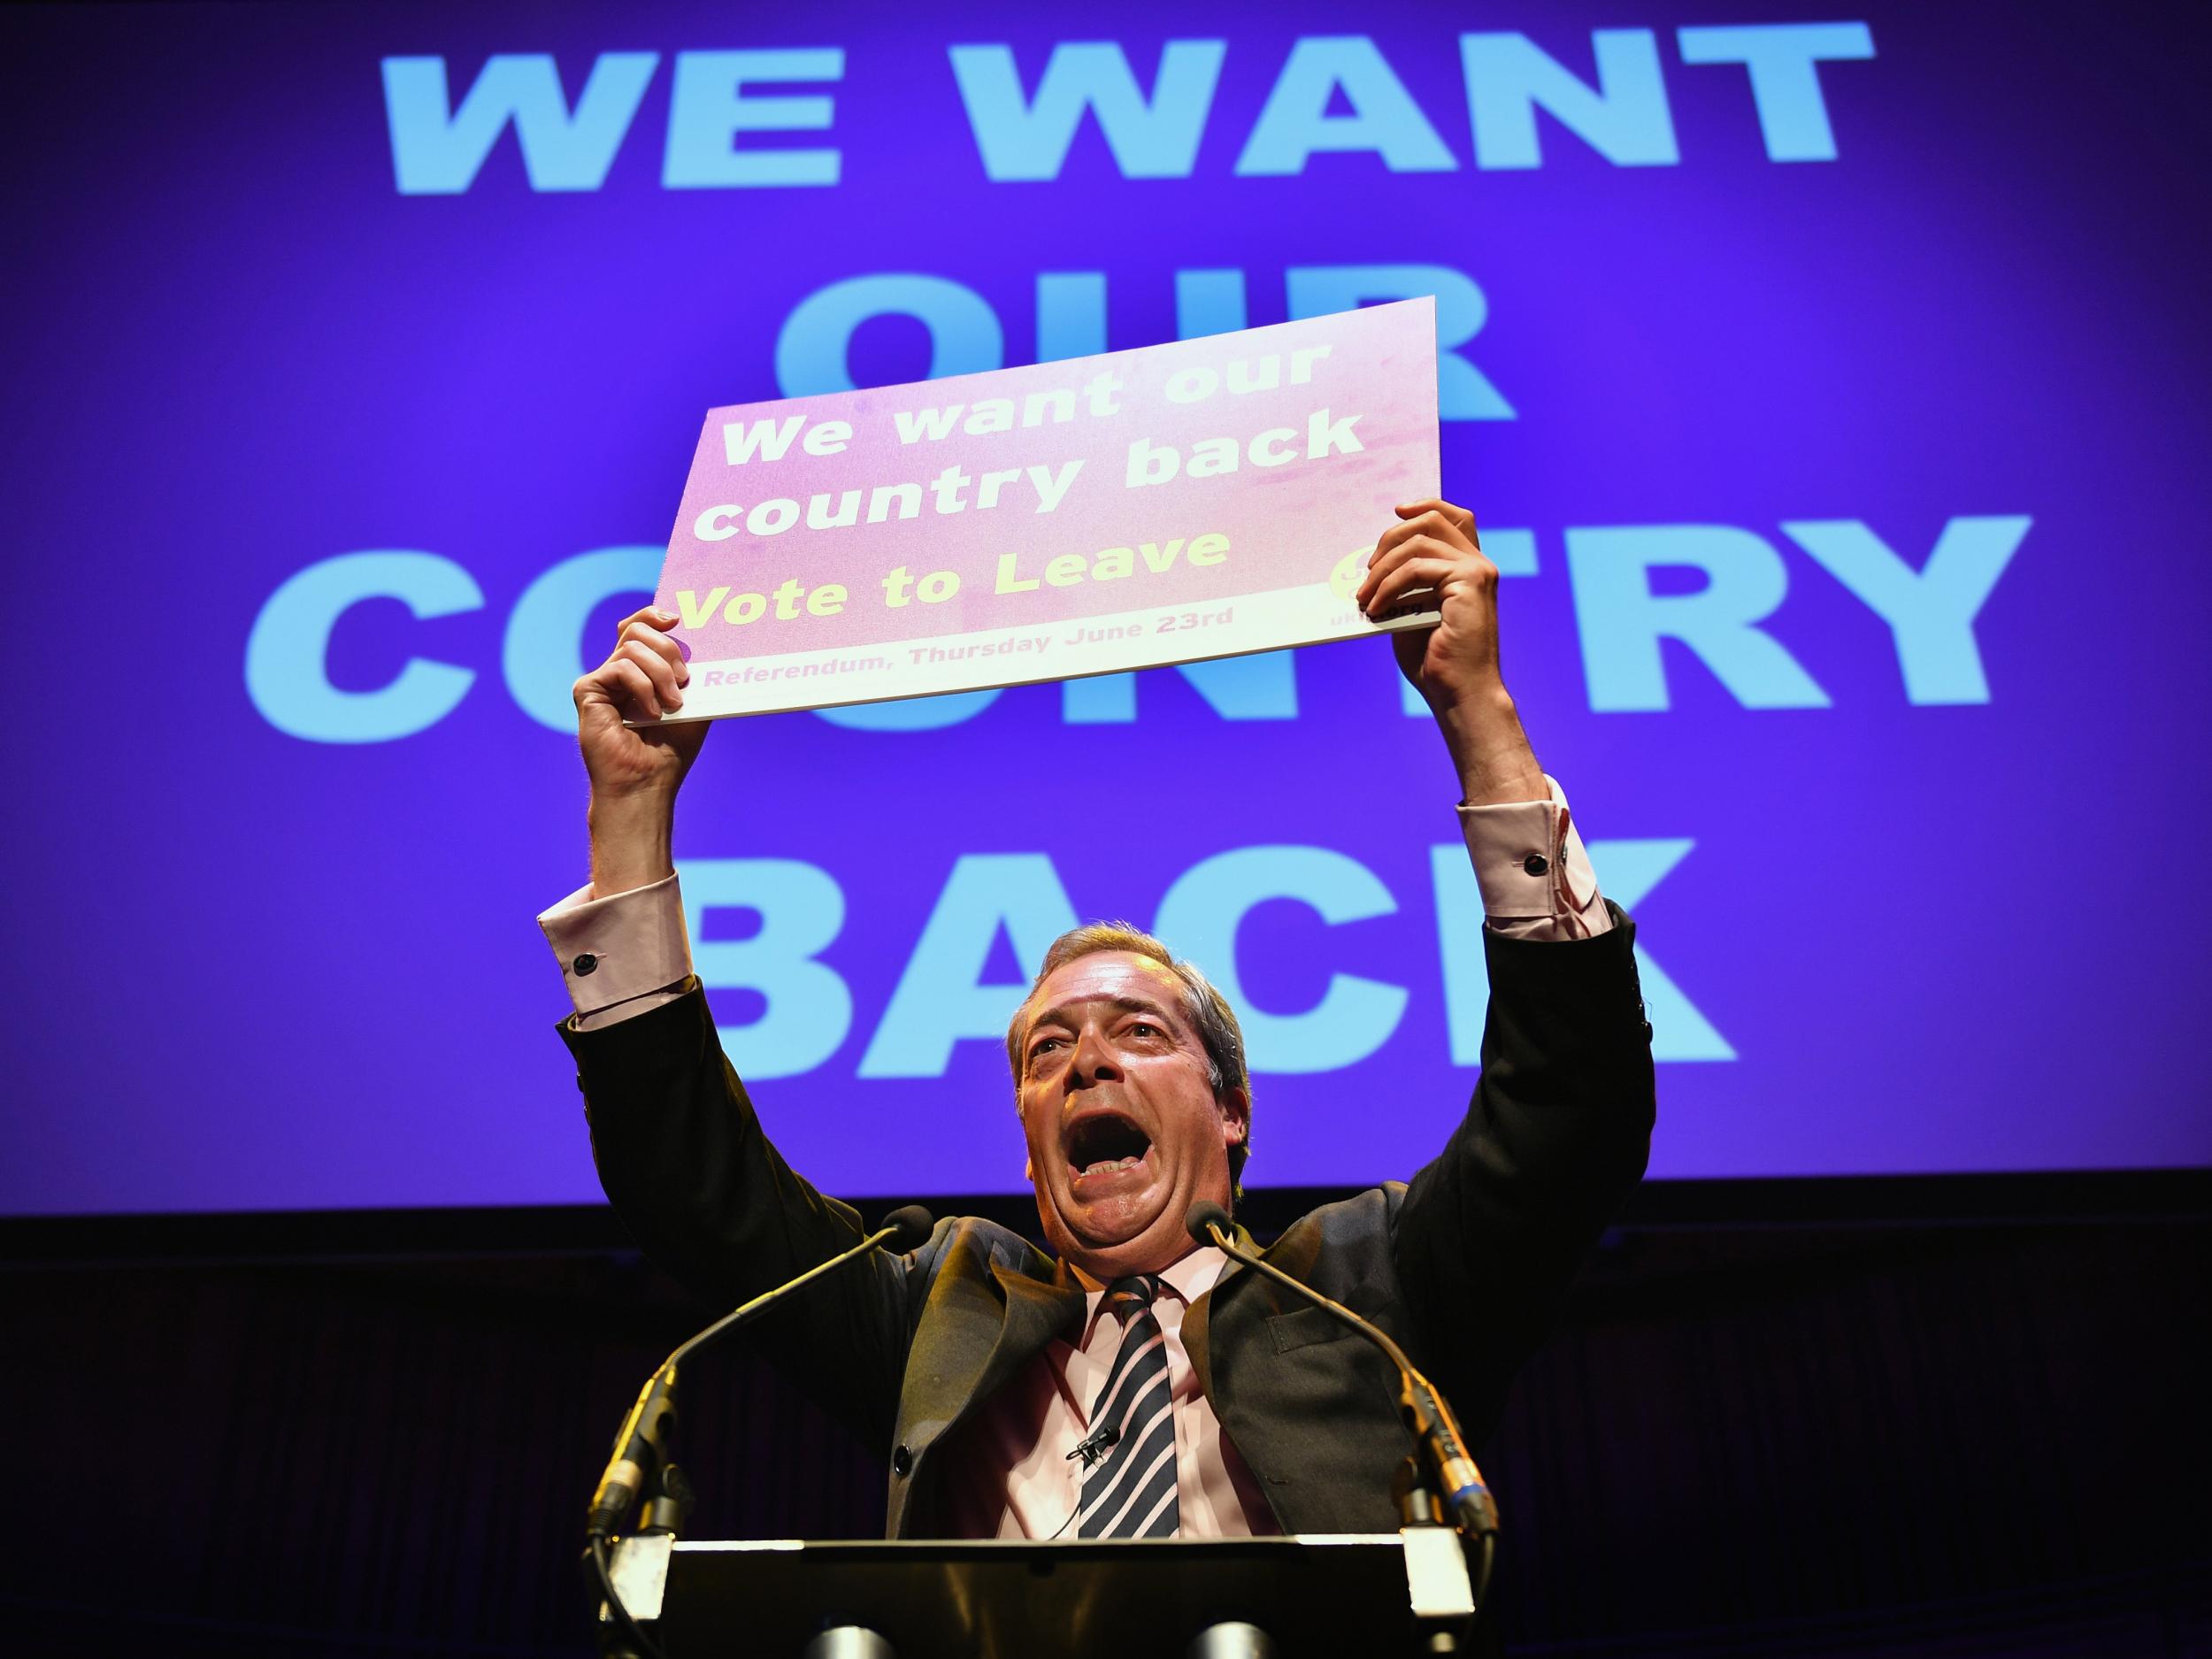 UKIP Leader Nigel Farage MEP, speaks at the final 'We Want Our Country Back' public meeting of the EU Referendum campaign on June 20, 2016